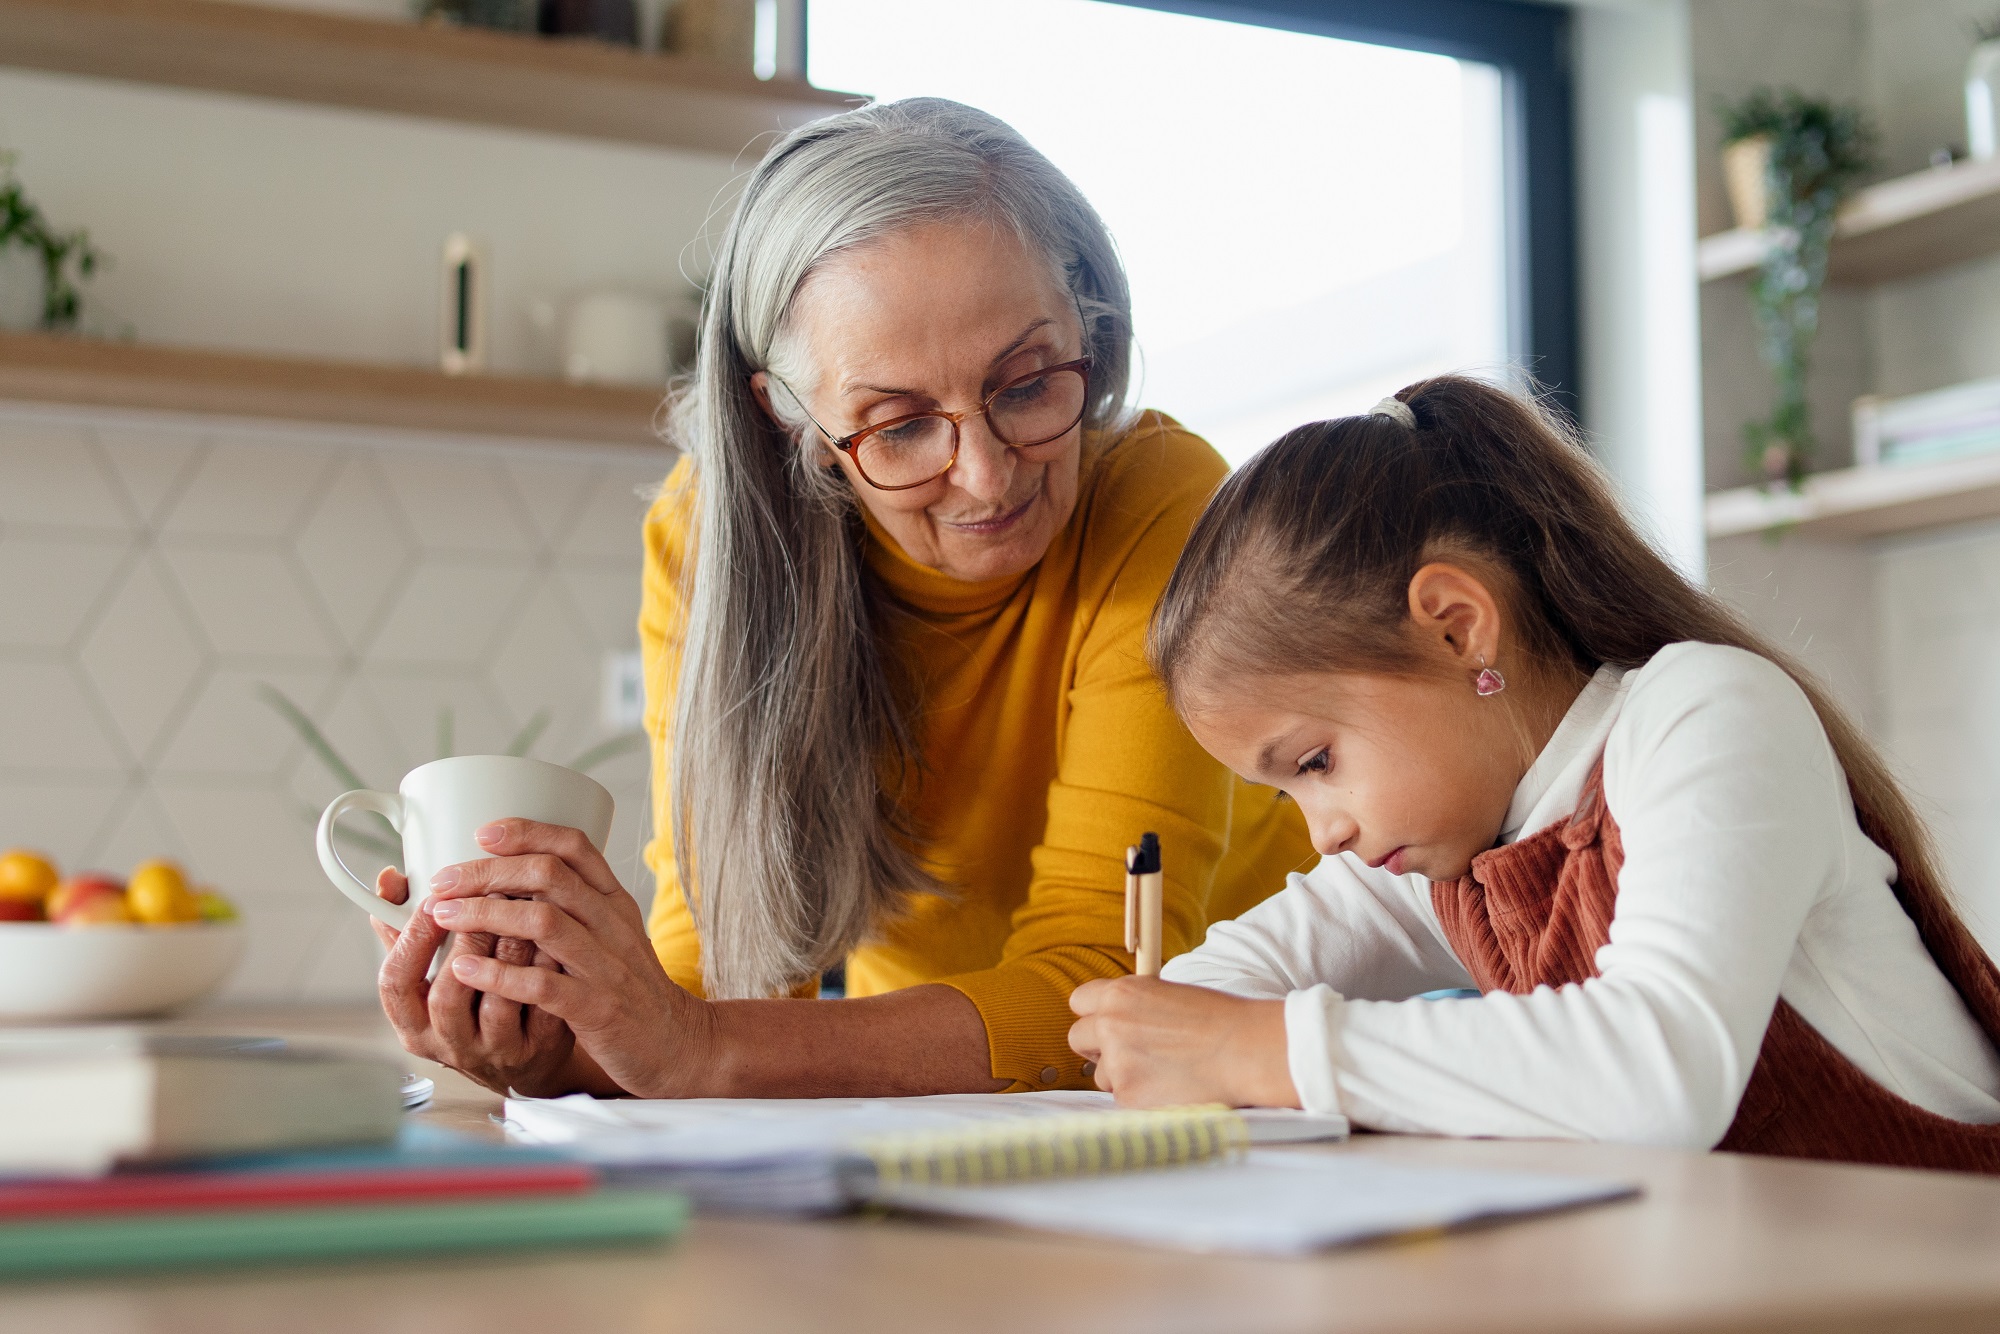 informal child care providers, When grandparents raise grandkids: older woman with long hair holding coffee cup helping young girl with homework